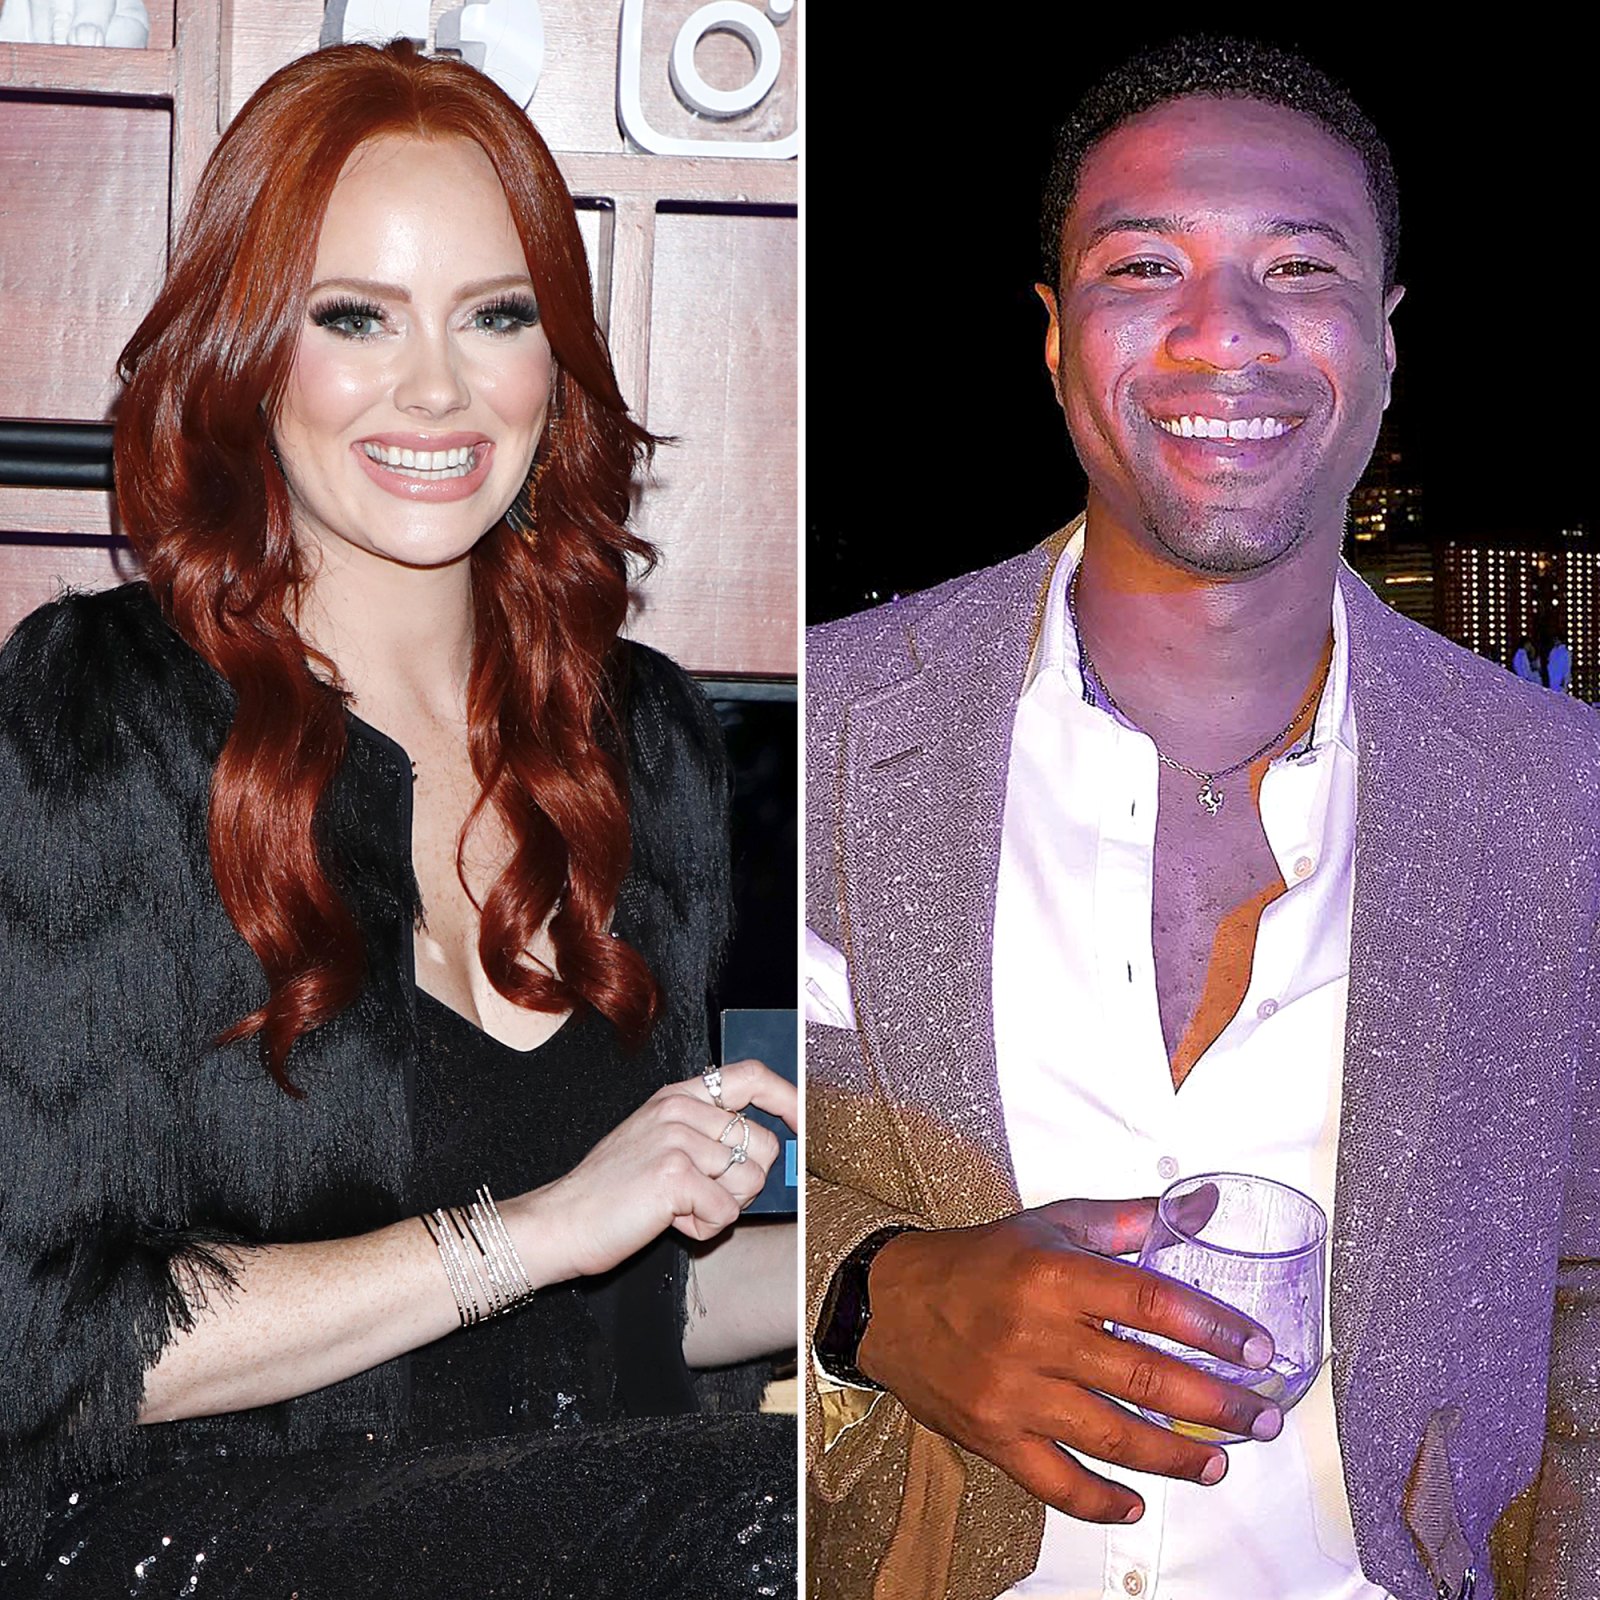 Southern Charm Kathryn Dennis New Man Chleb Ravenell 5 Things to Know